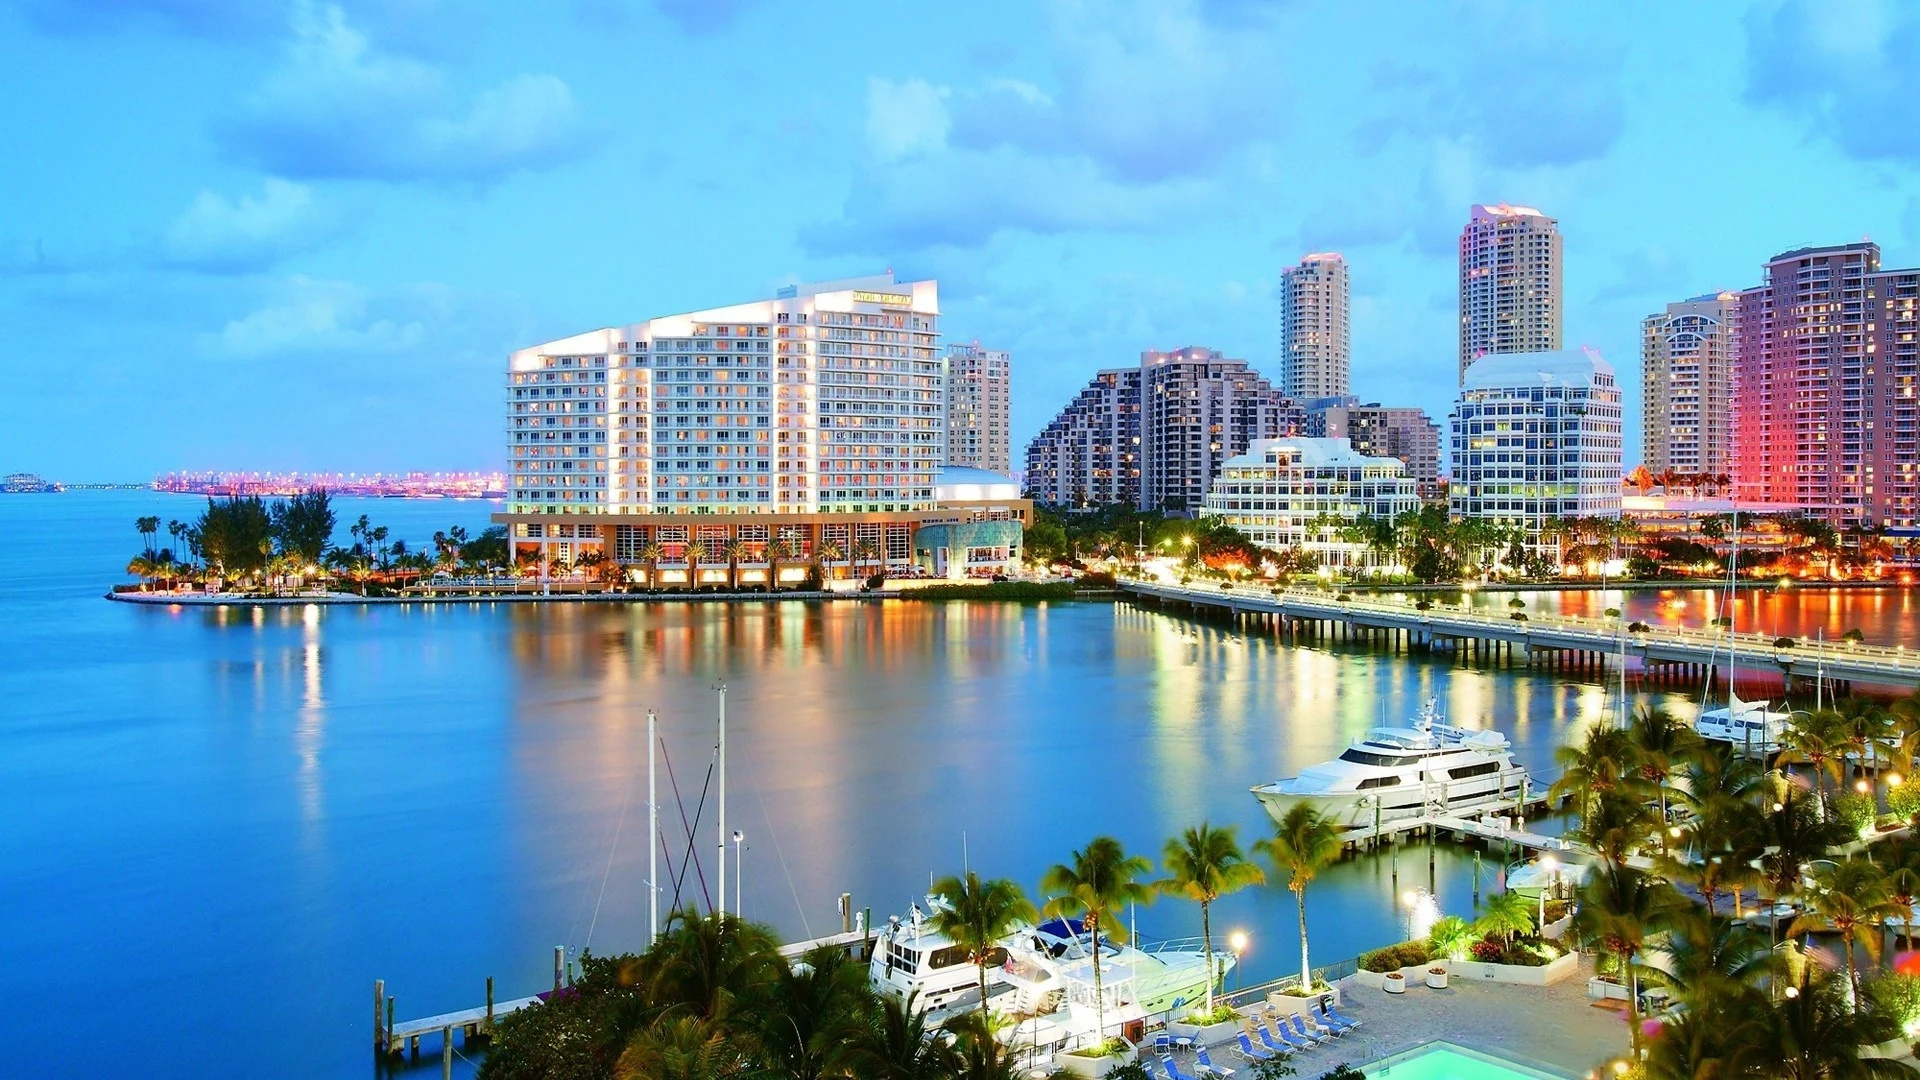 Florida: The third-most populous state in the nation as of 2020, Miami. 1920x1080 Full HD Wallpaper.